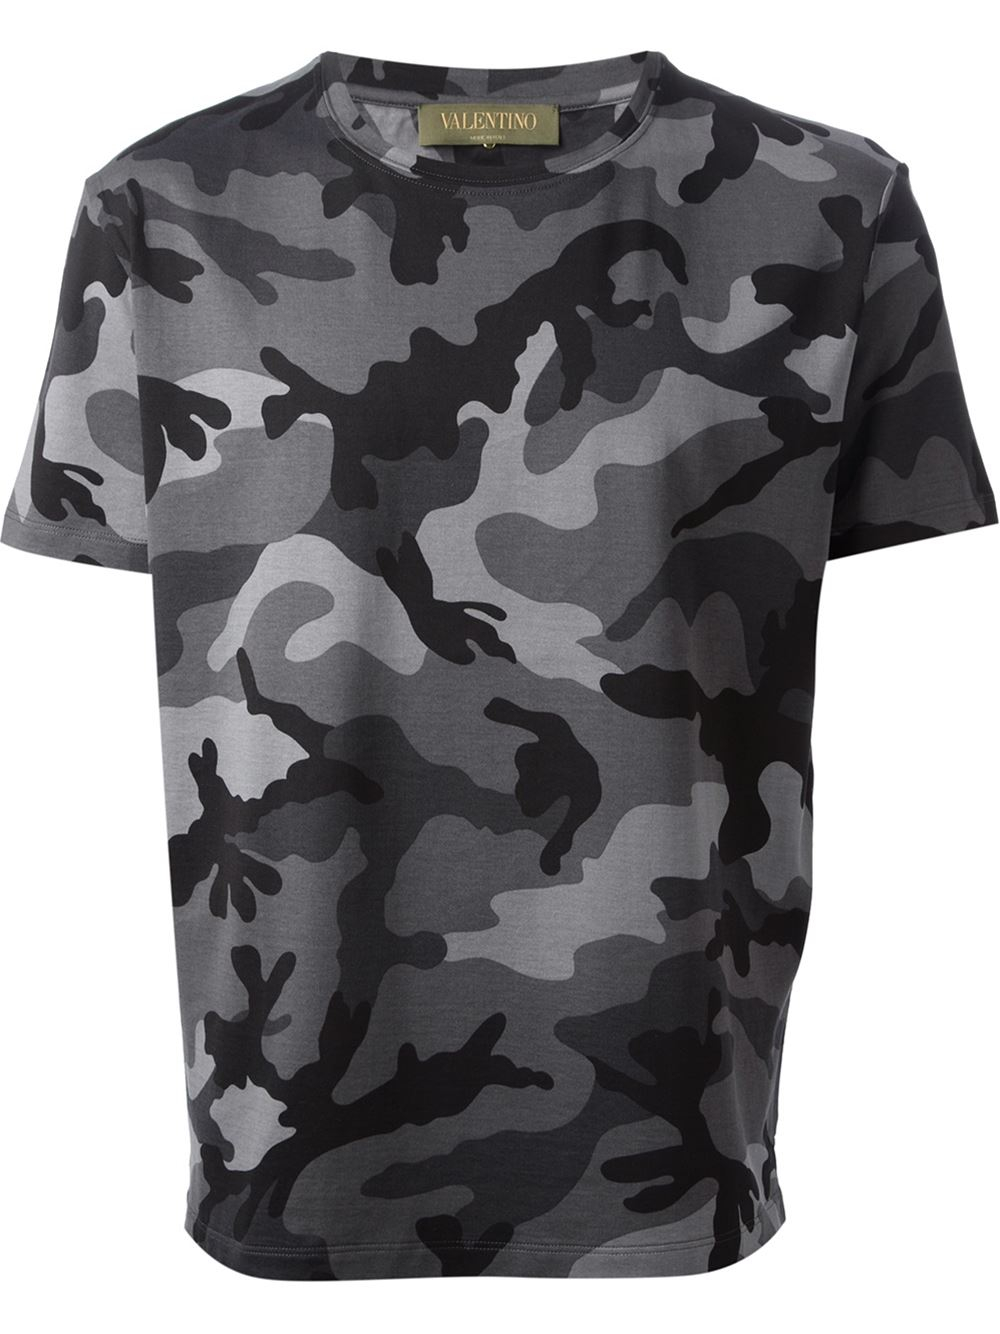 Valentino Camouflage Print Tshirt in Gray for Men - Lyst